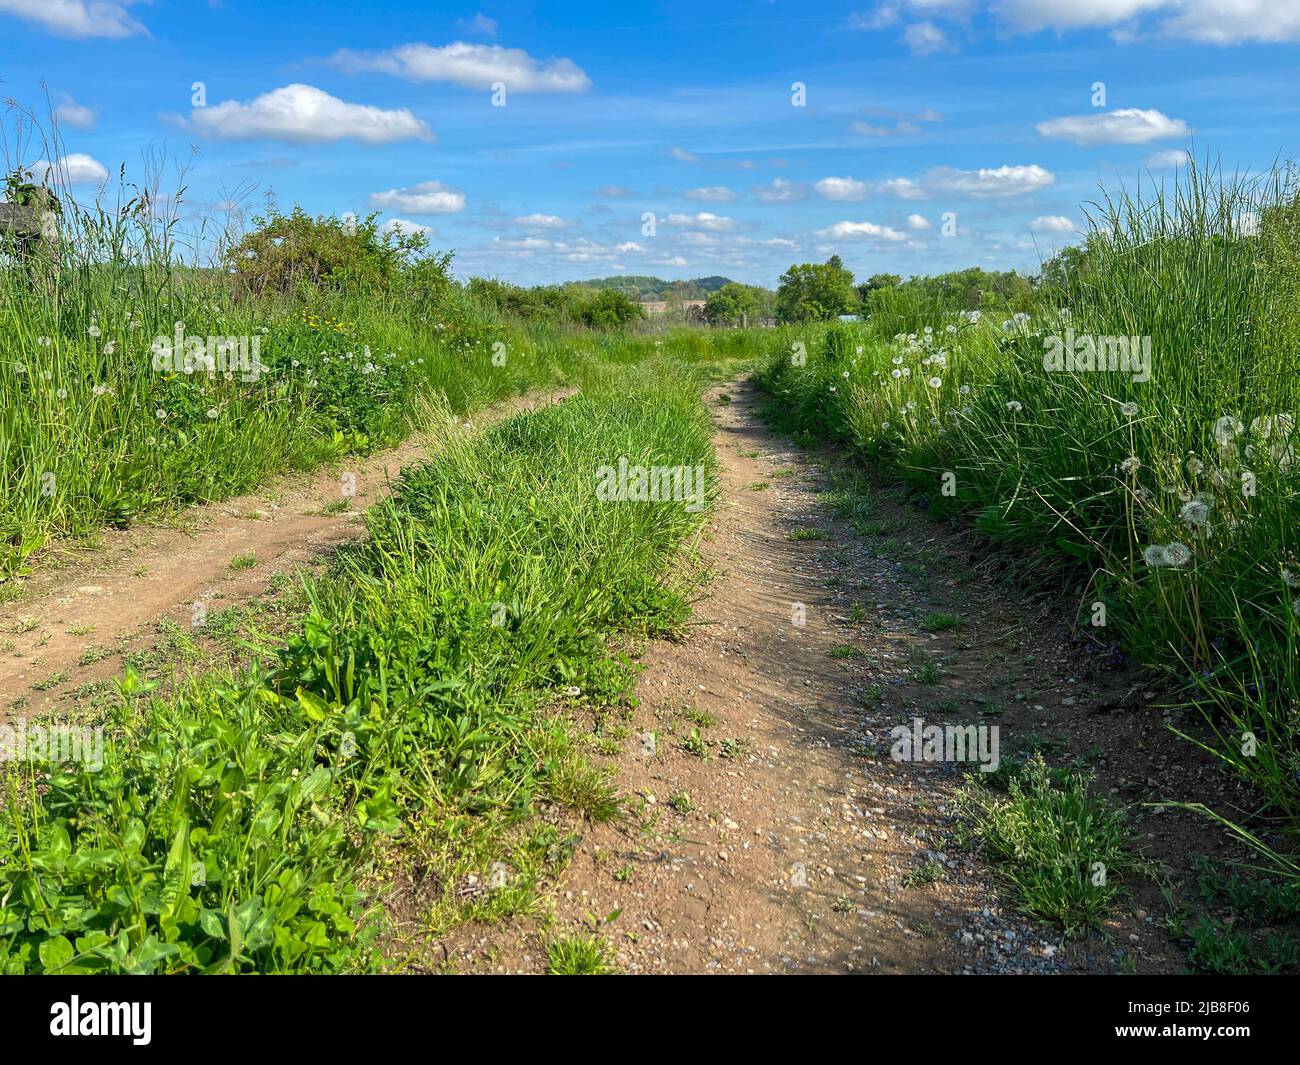 Idyllic dirt road leads through peaceful serene green grass pasture under blue sky with puffy white clouds. Journey concept, new beginning, with no pe Stock Photo